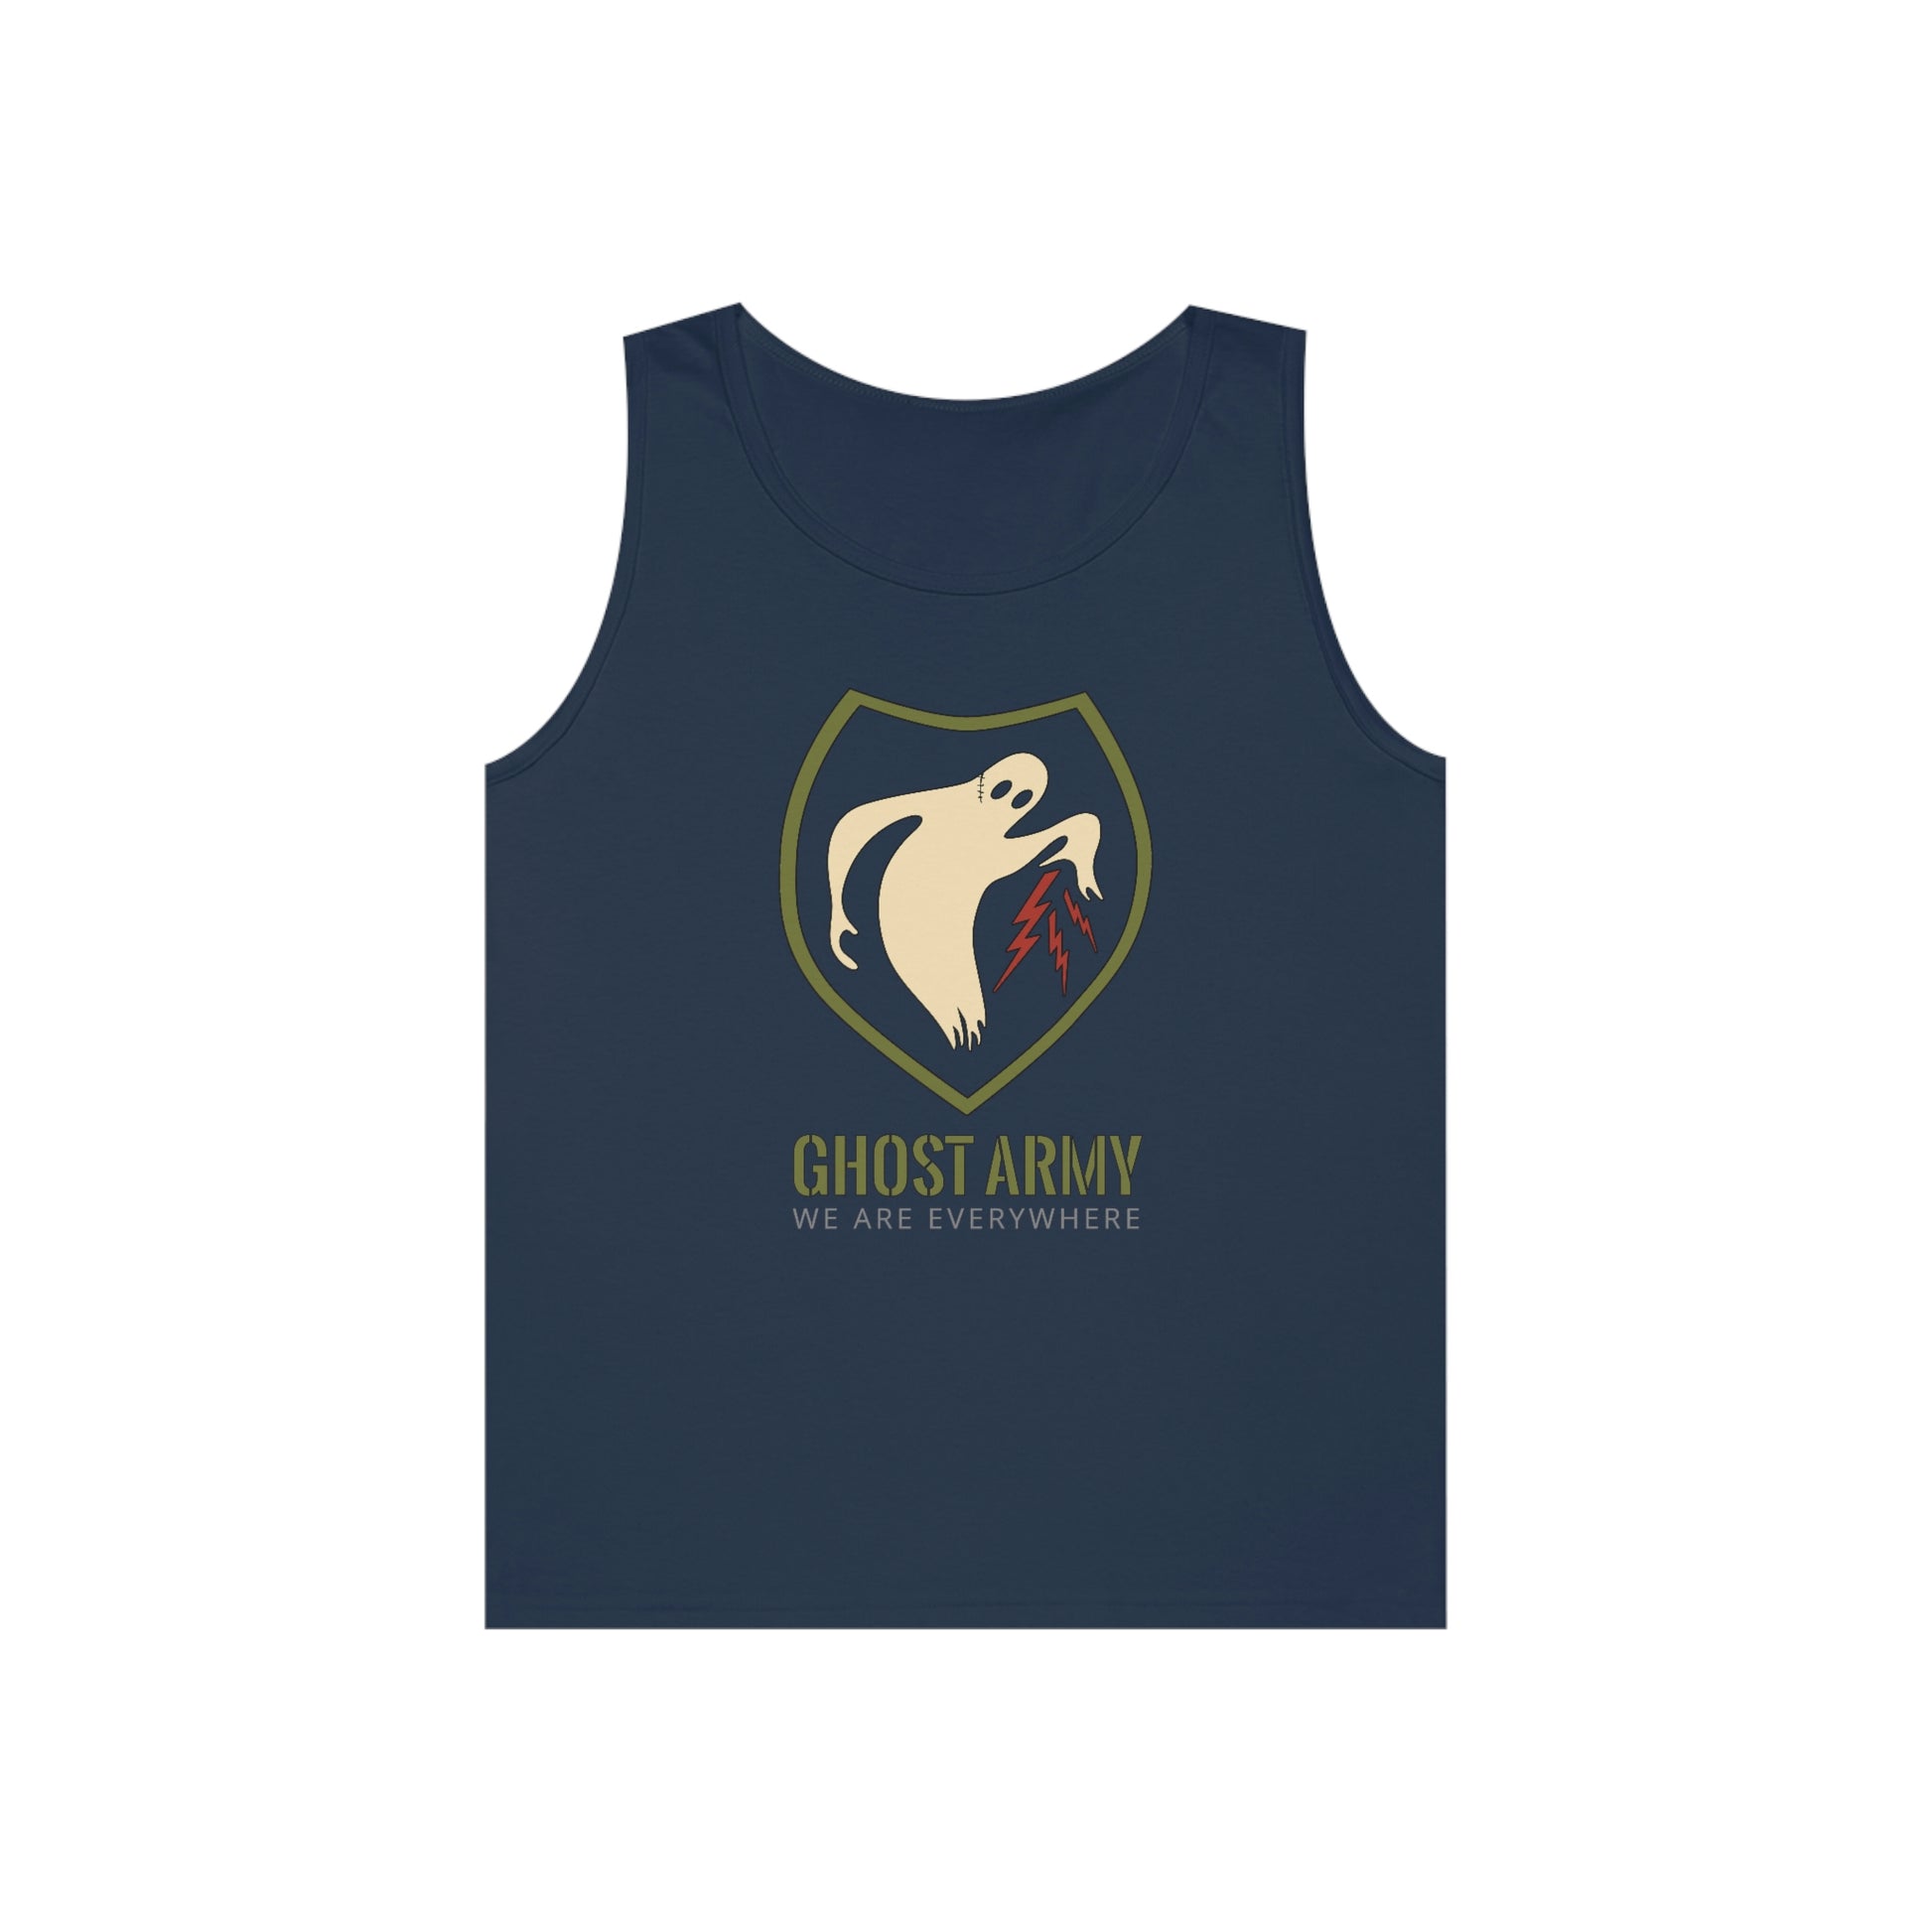 Ghost Army - We Are Everywhere | Men's Heavy Cotton Tank Top - Rise of The New Media